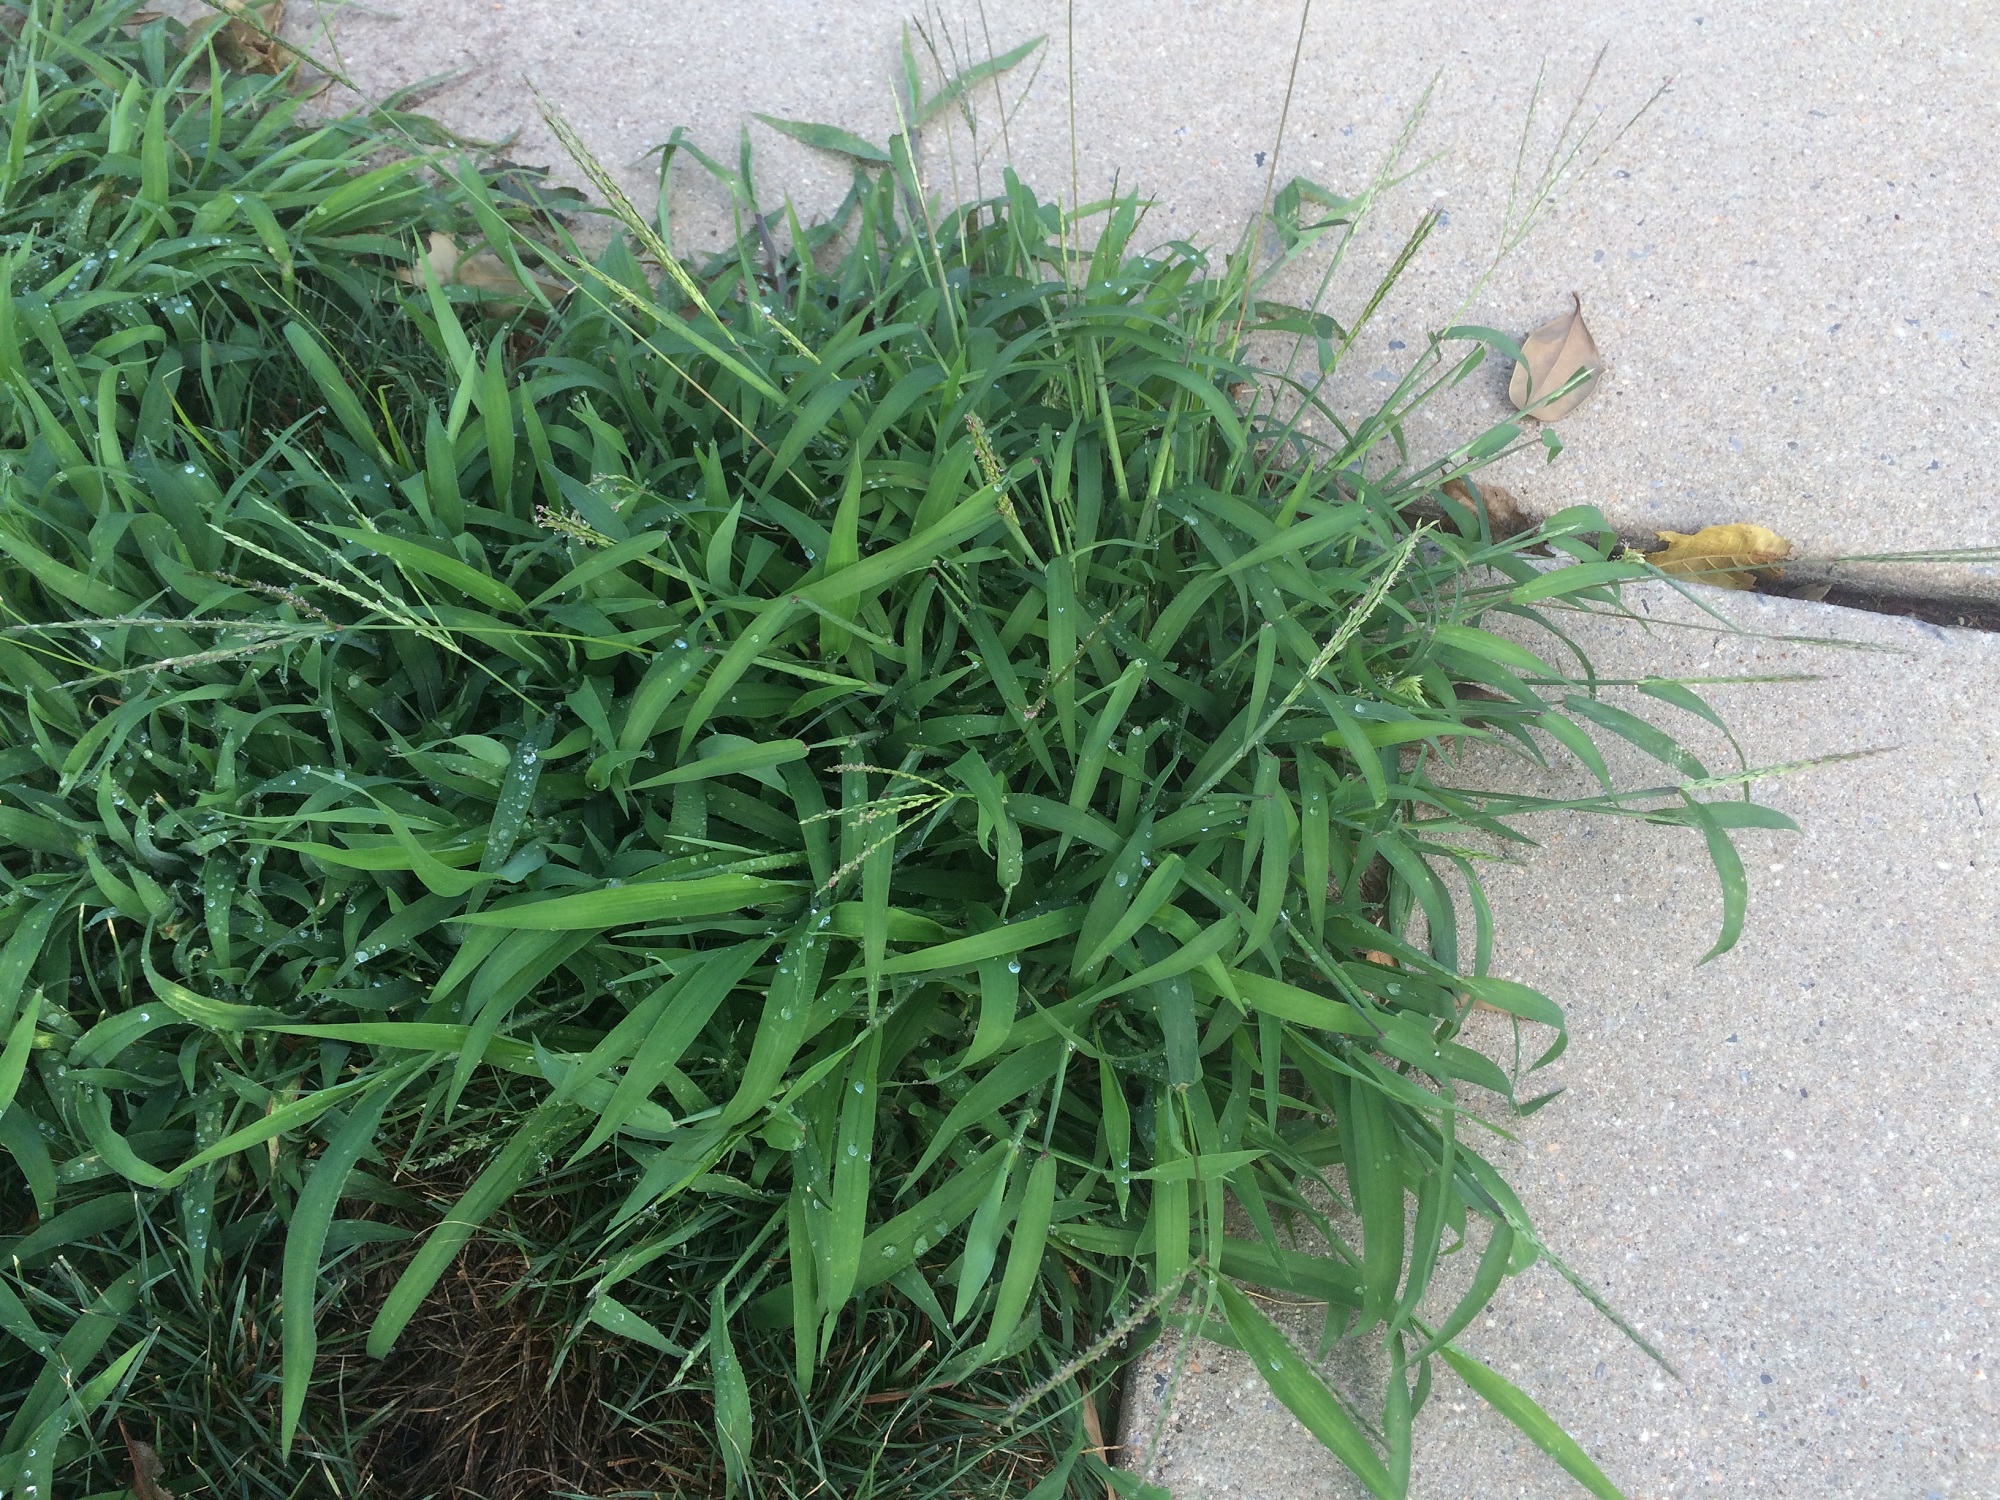 crabgrass growing by lawn